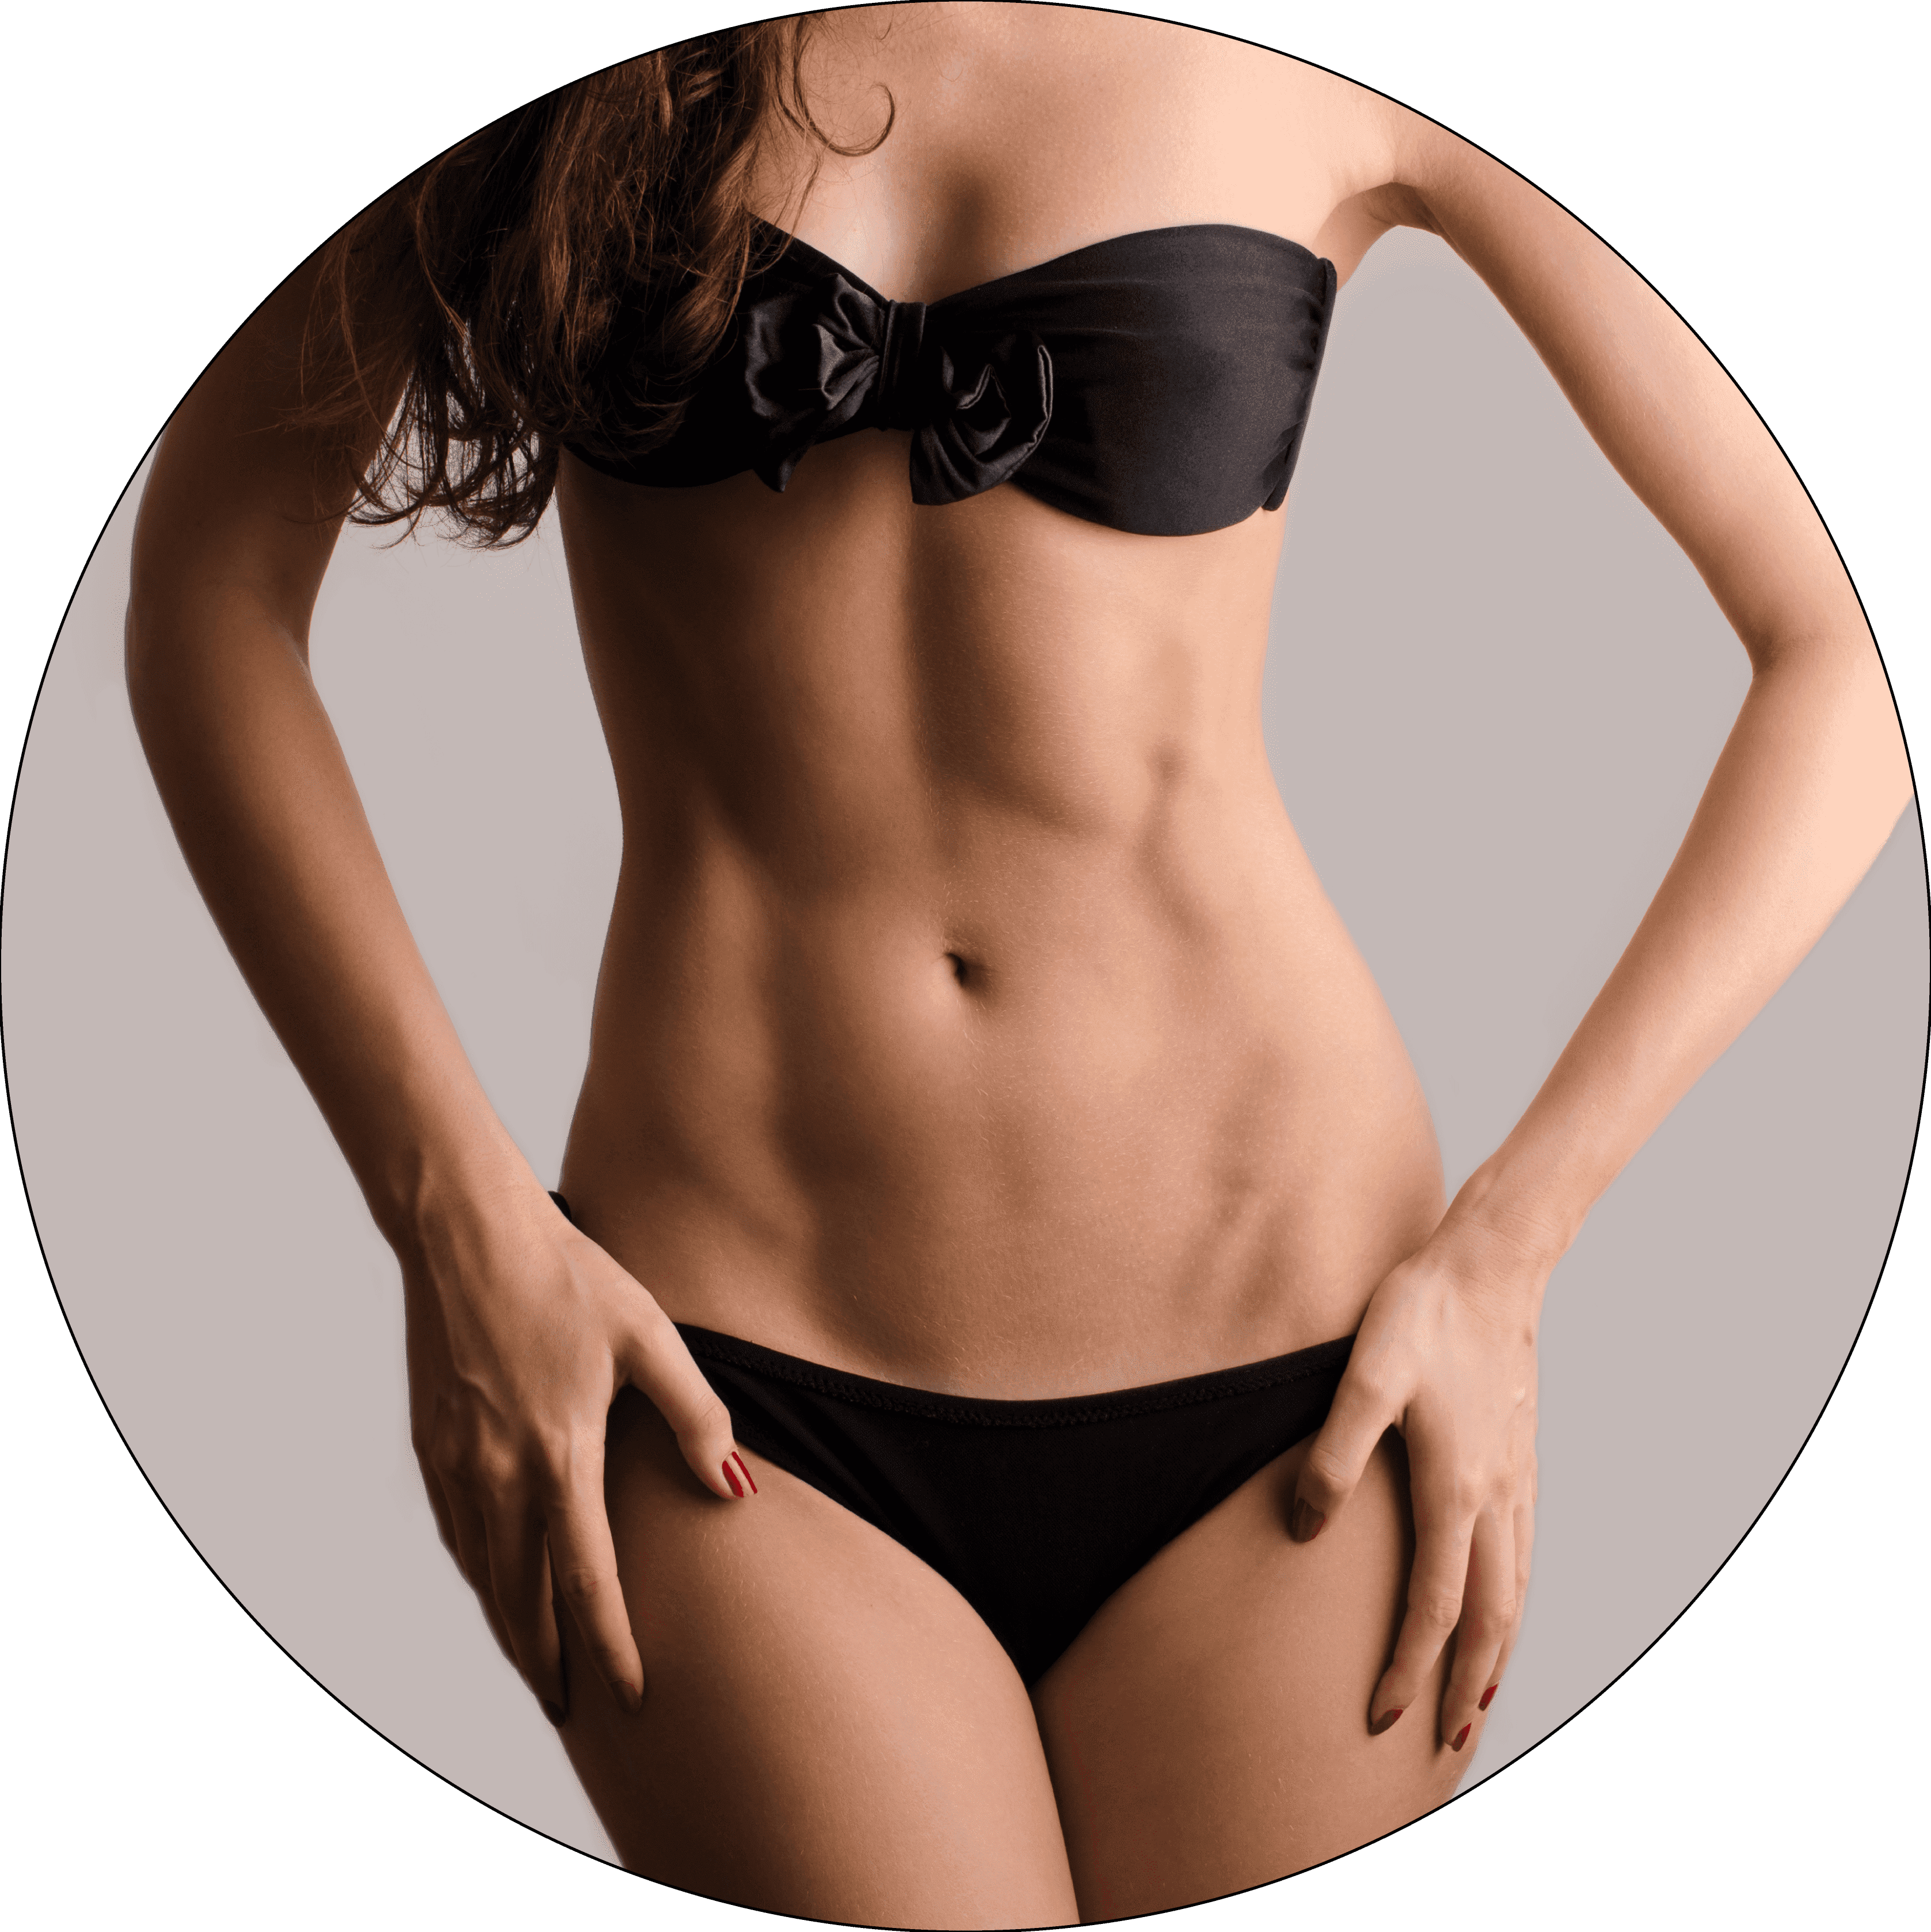 Abs - Amaira Med Spa - Emsculpt-neo - Radio frequency